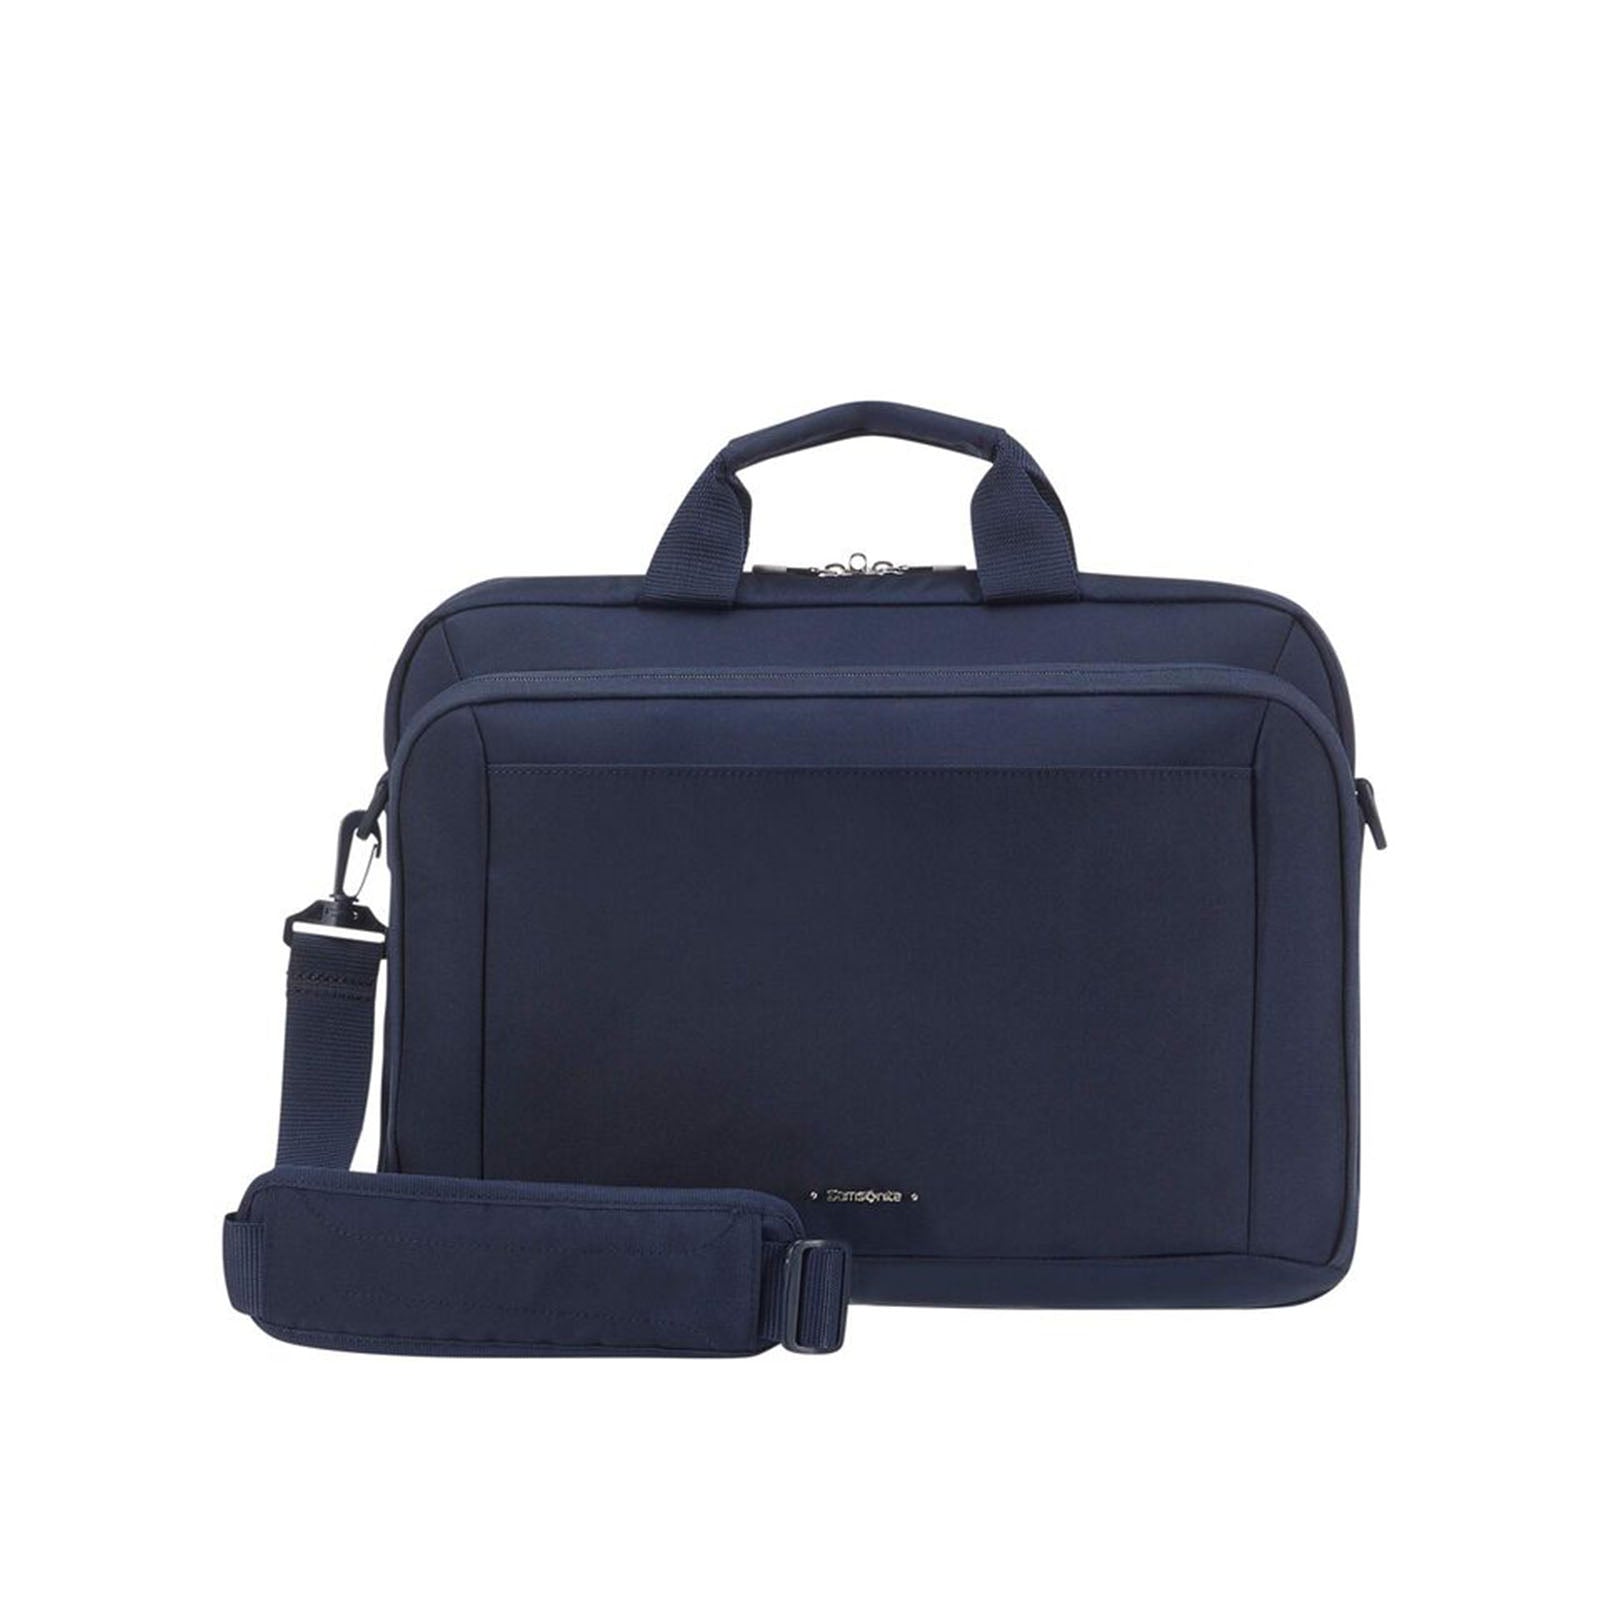 Samsonite-Guardit-Classy-15-Inch-Laptop-Bailhandle-Midnight-Blue-Front